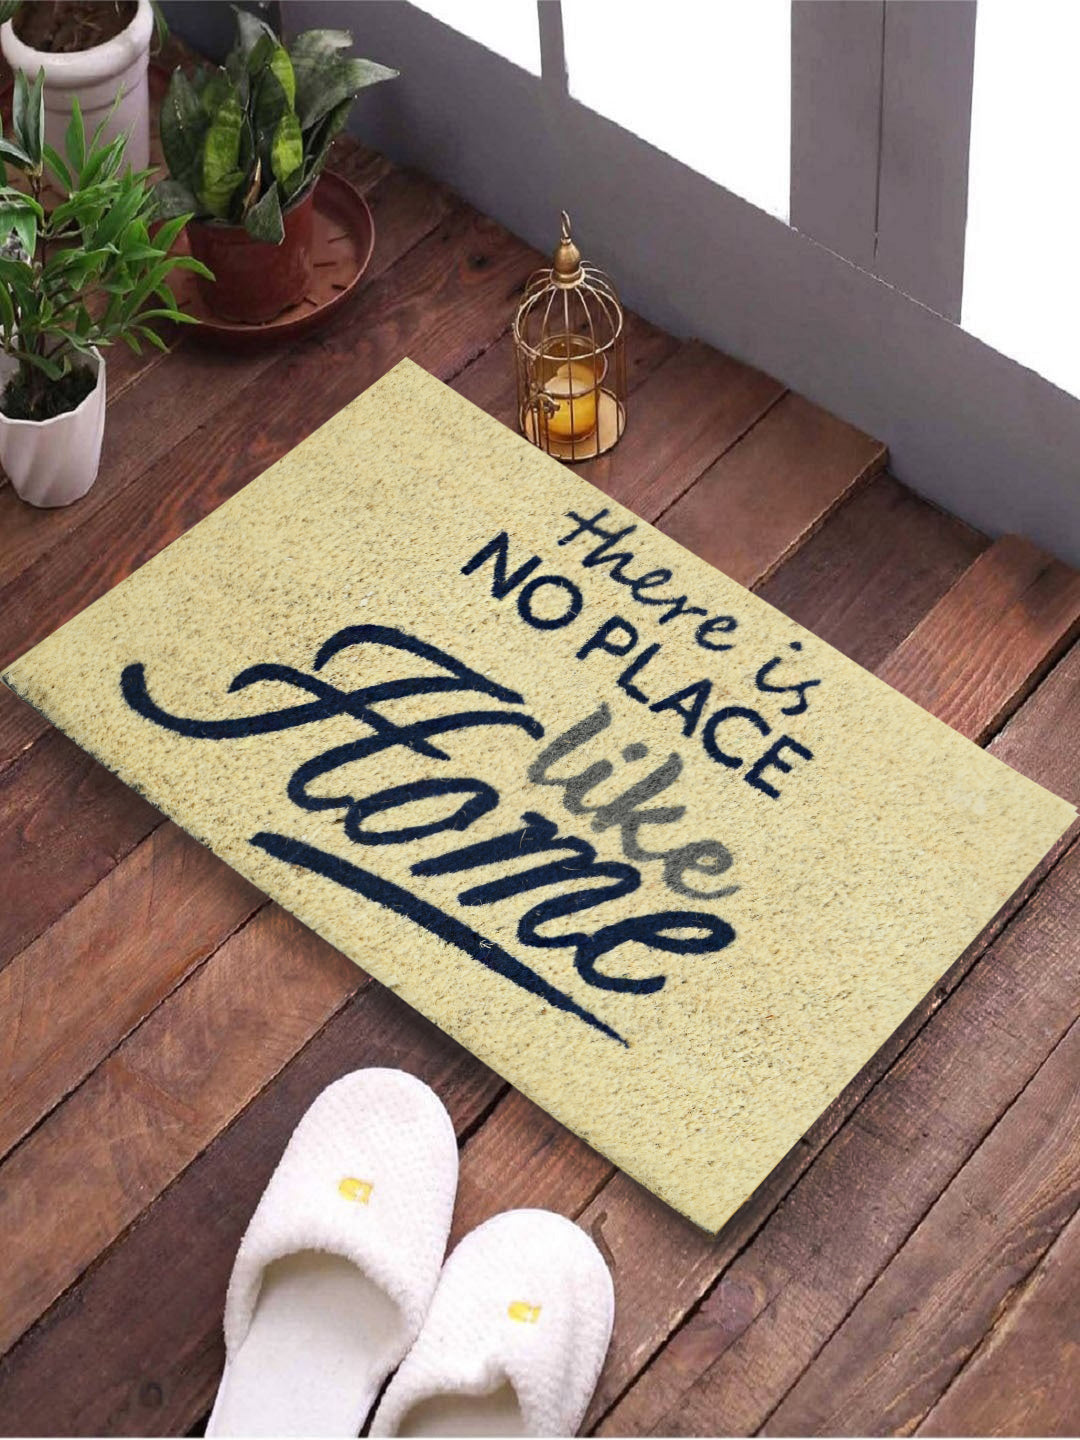 <h4>SWHF Coir Door Mat with Anti Skid Rubberized Backing: (There is No Place Like Home)</h4>